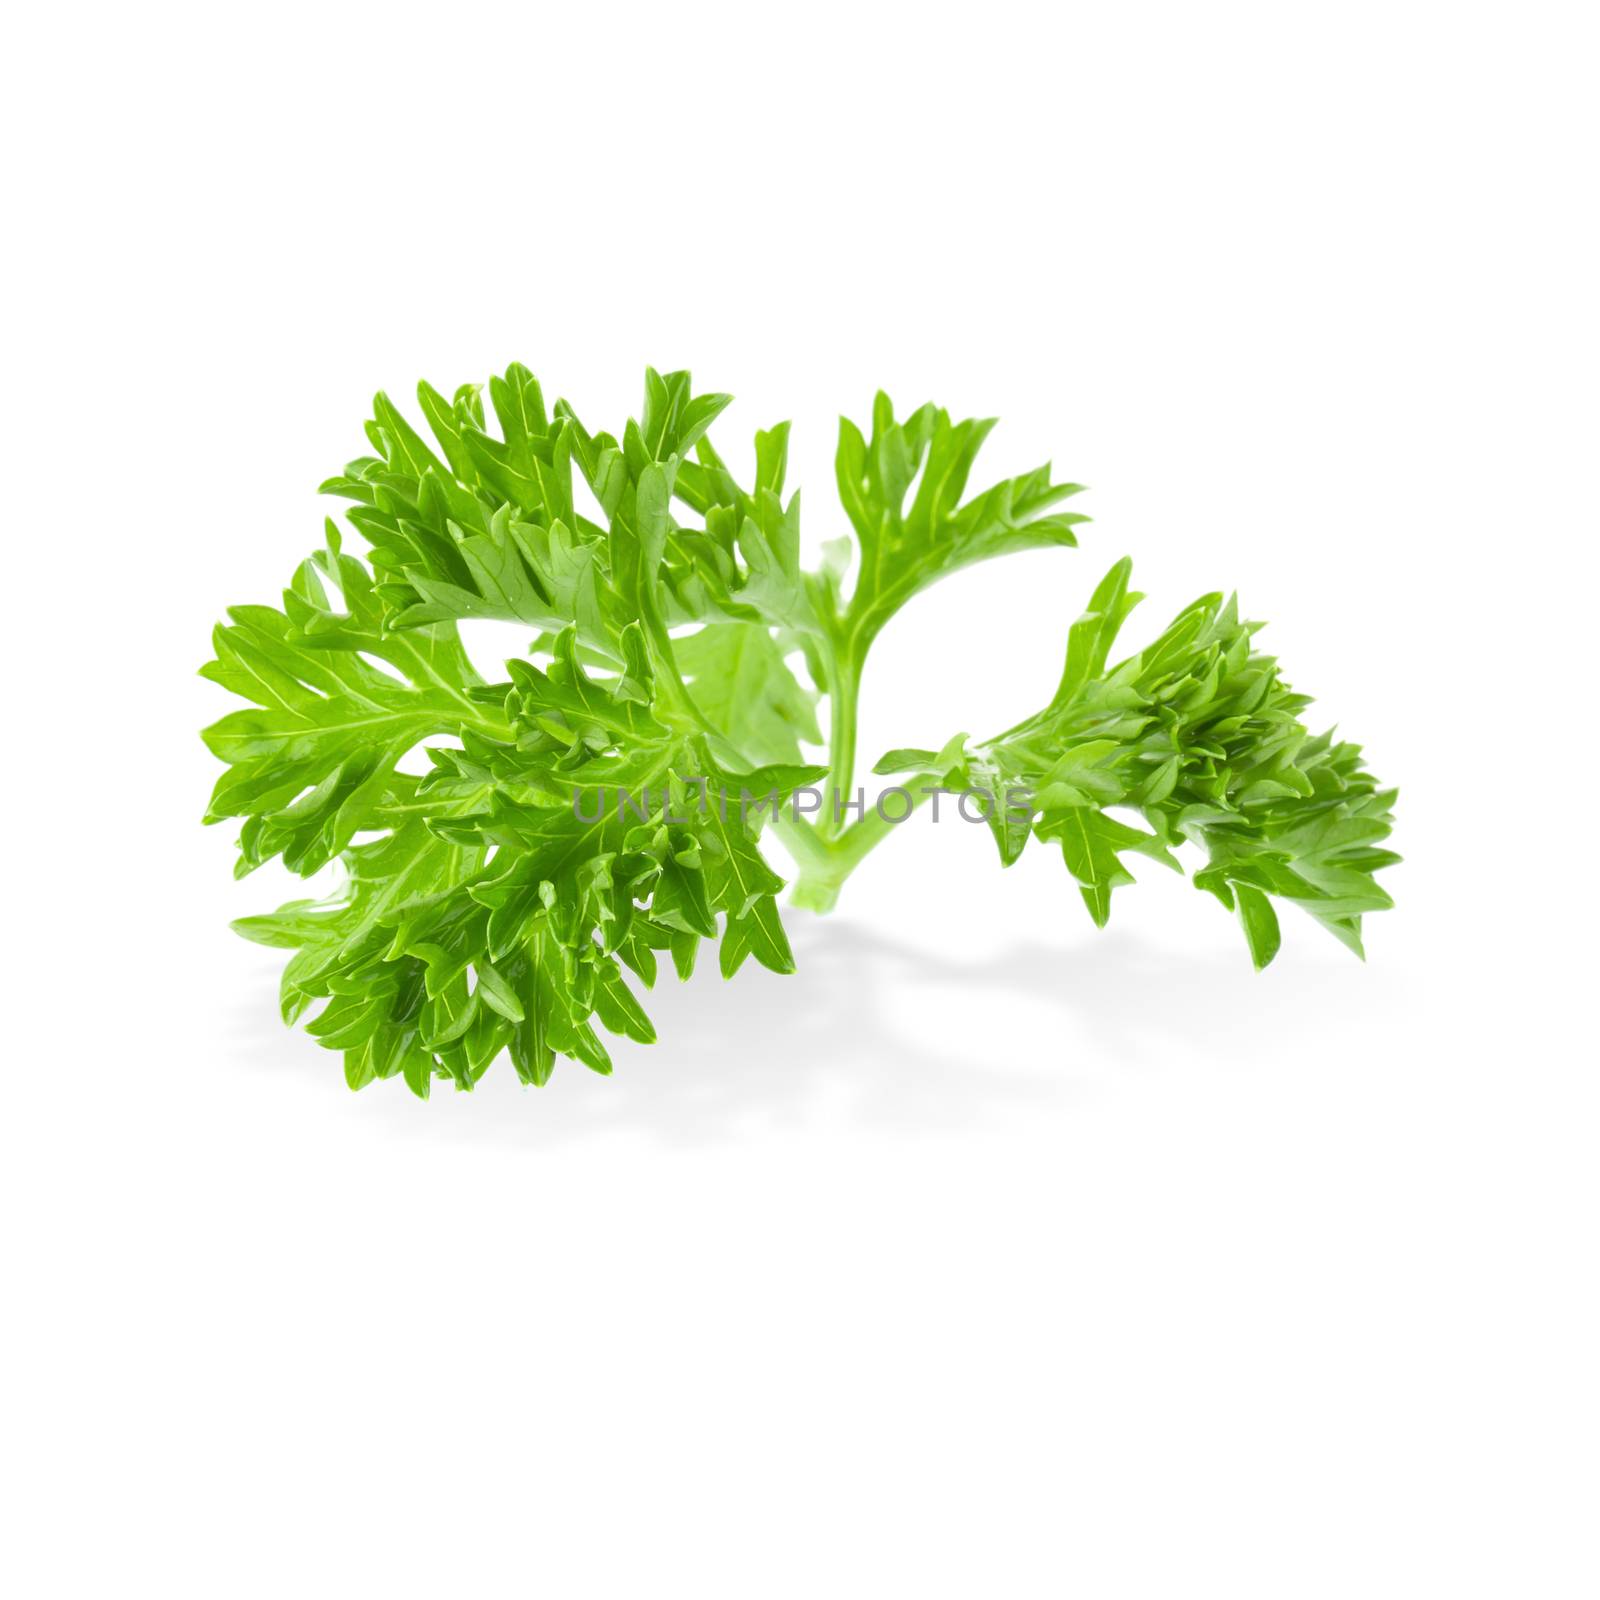 Fresh branch of green parsley natural food isolated on white background.